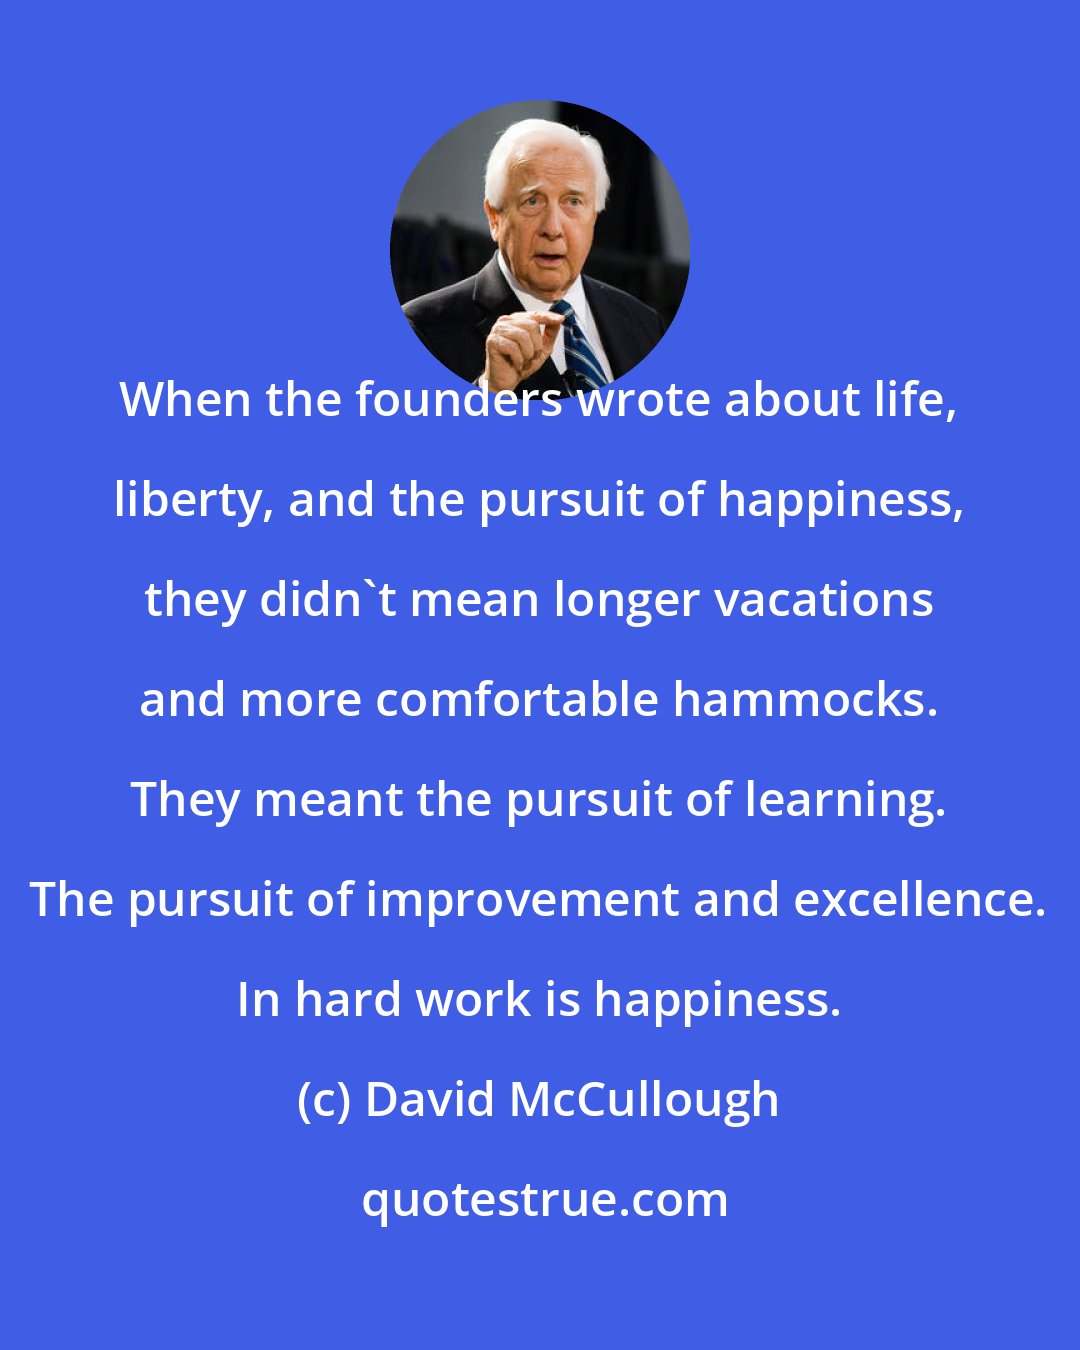 David McCullough: When the founders wrote about life, liberty, and the pursuit of happiness, they didn't mean longer vacations and more comfortable hammocks. They meant the pursuit of learning. The pursuit of improvement and excellence. In hard work is happiness.